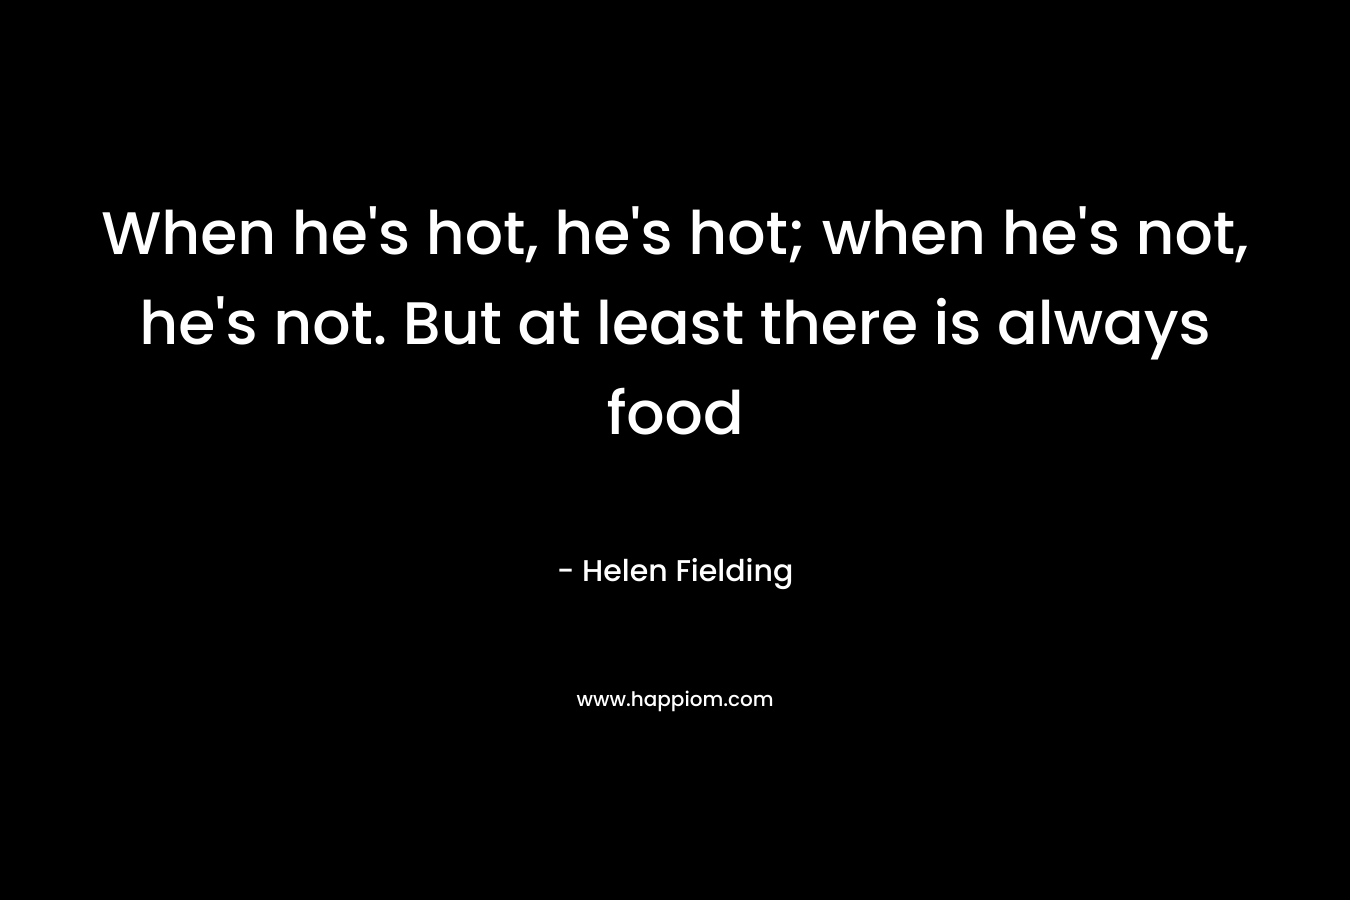 When he's hot, he's hot; when he's not, he's not. But at least there is always food